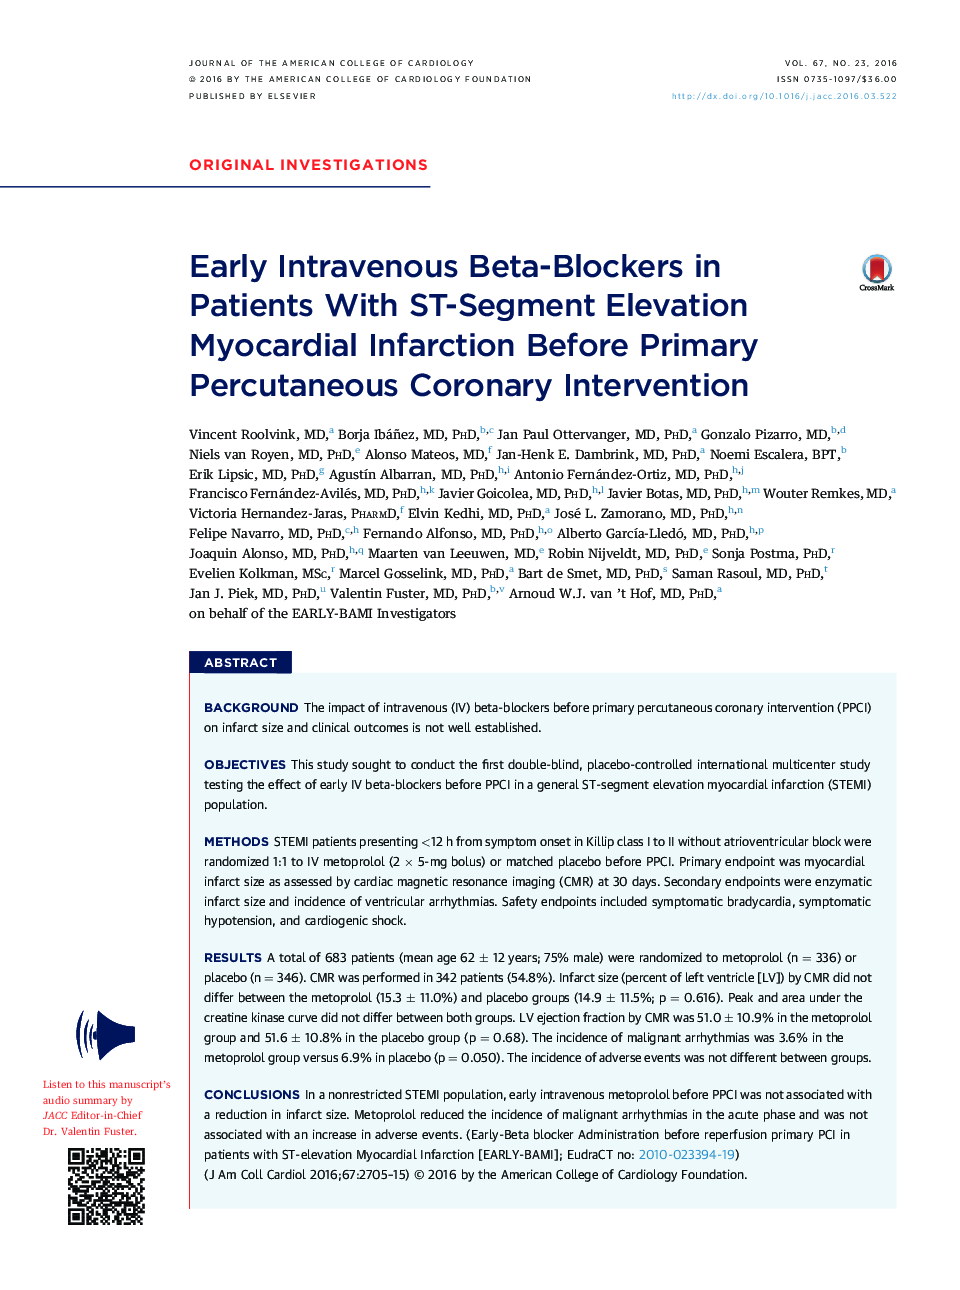 Early Intravenous Beta-Blockers in PatientsÂ With ST-Segment Elevation Myocardial Infarction Before Primary Percutaneous Coronary Intervention